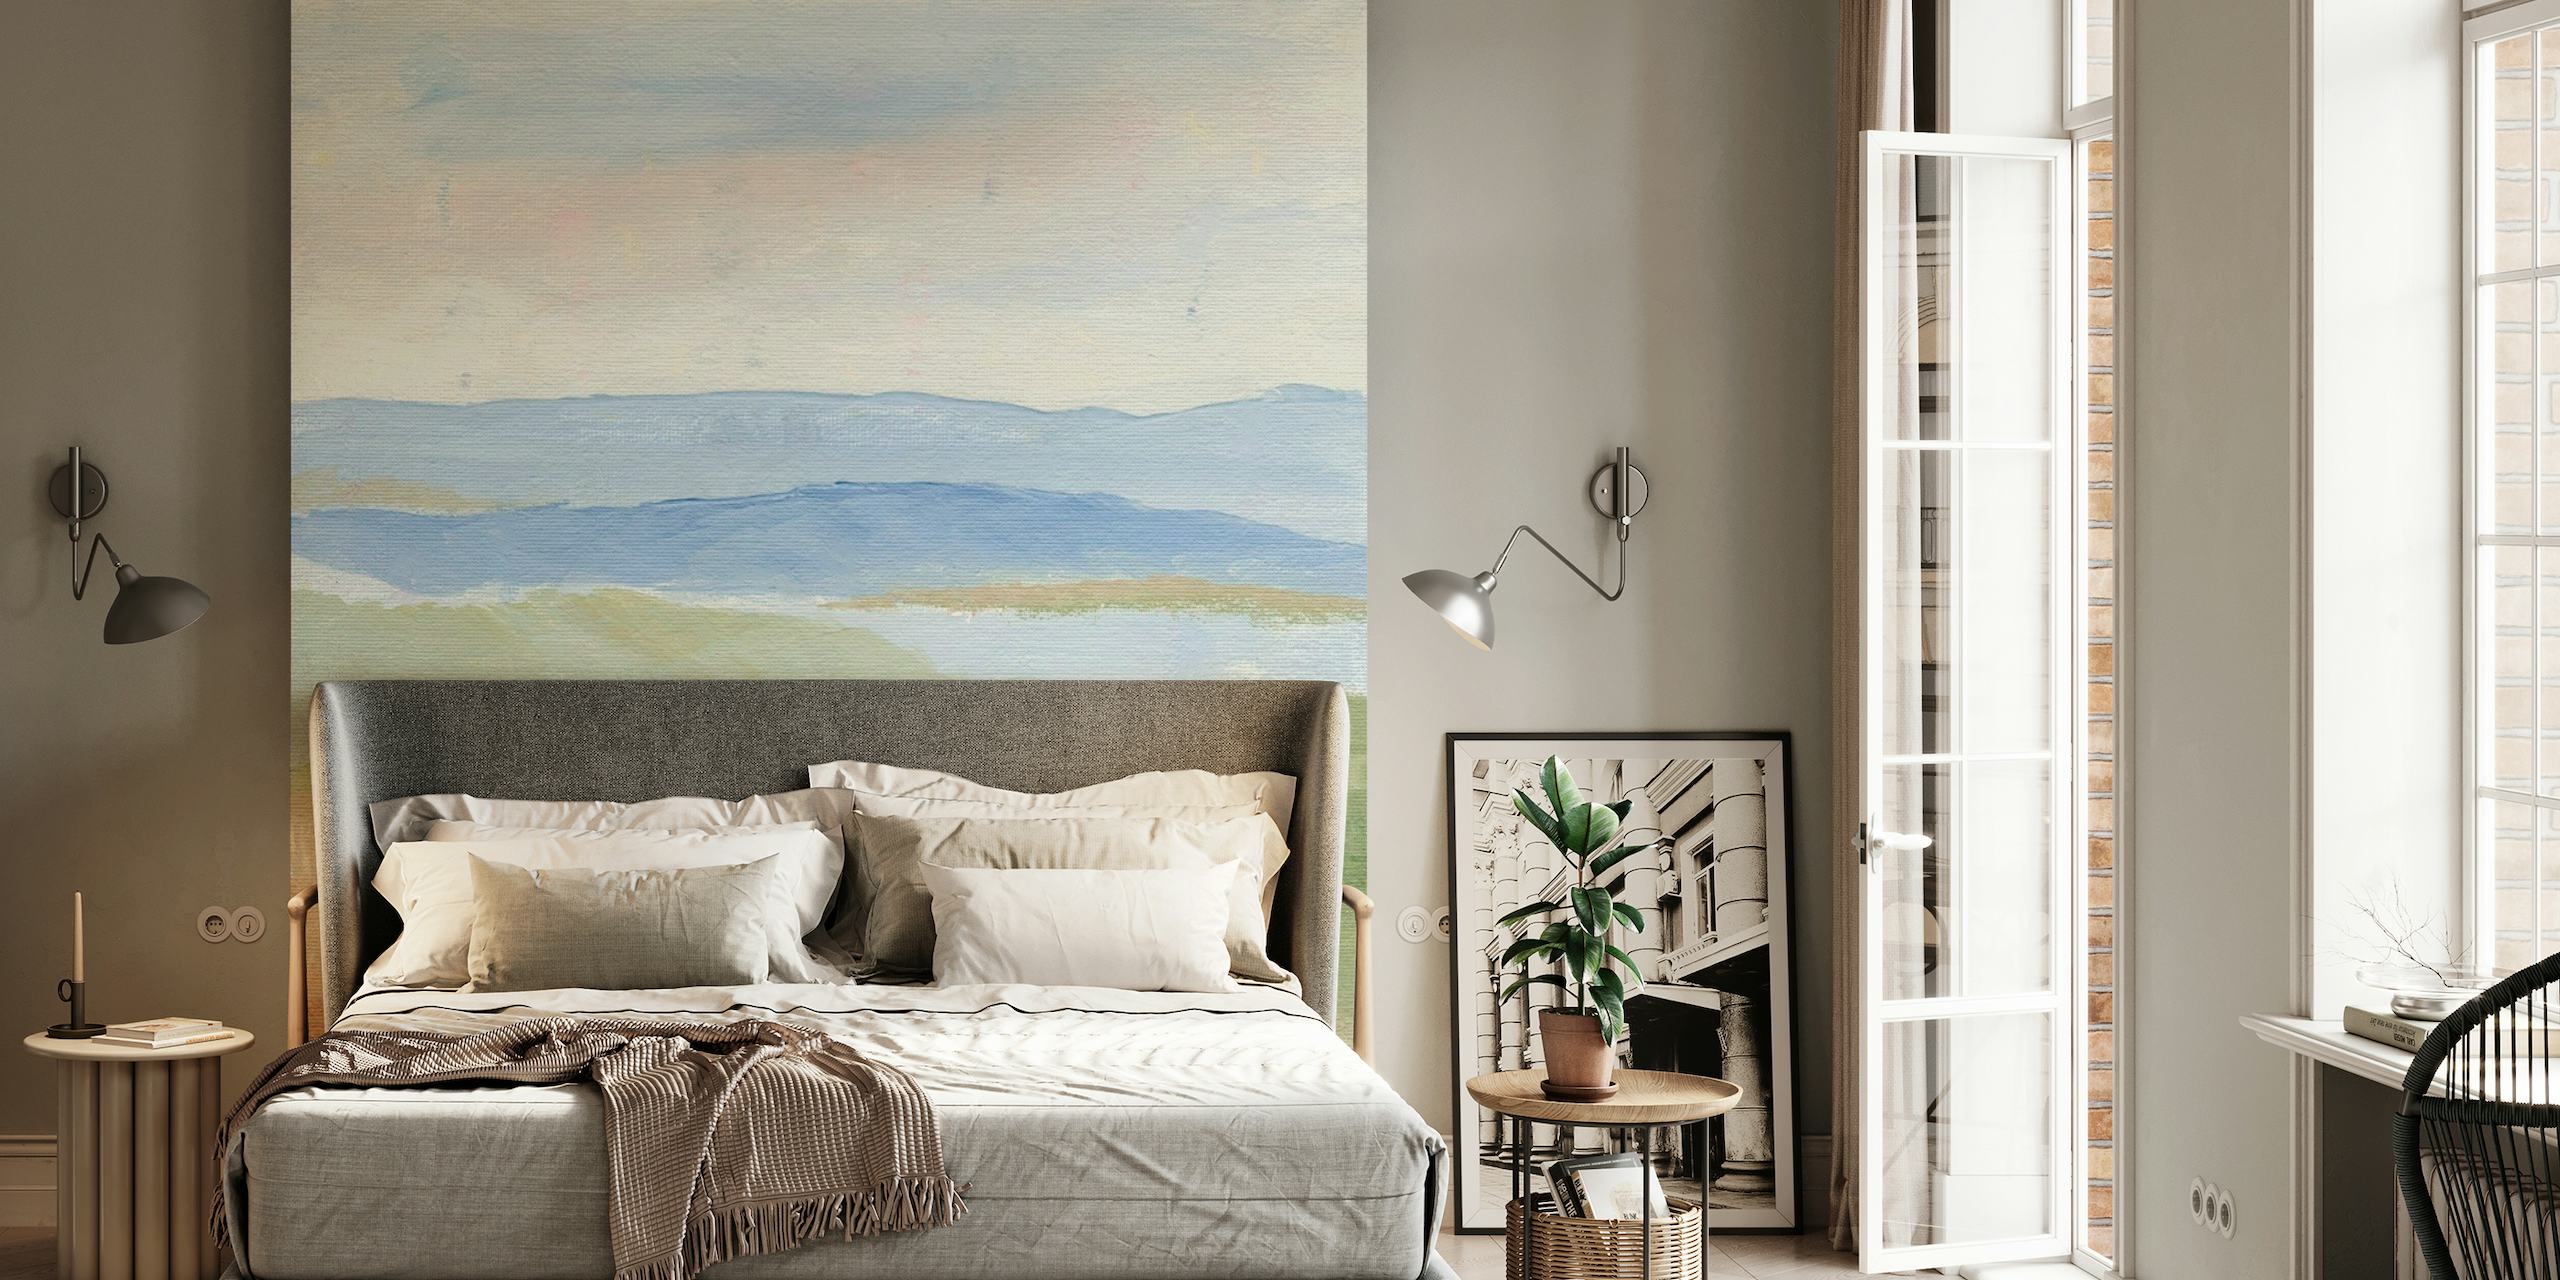 Watercolor landscape wall mural depicting a serene scene after rainfall with gentle greenery and distant hills